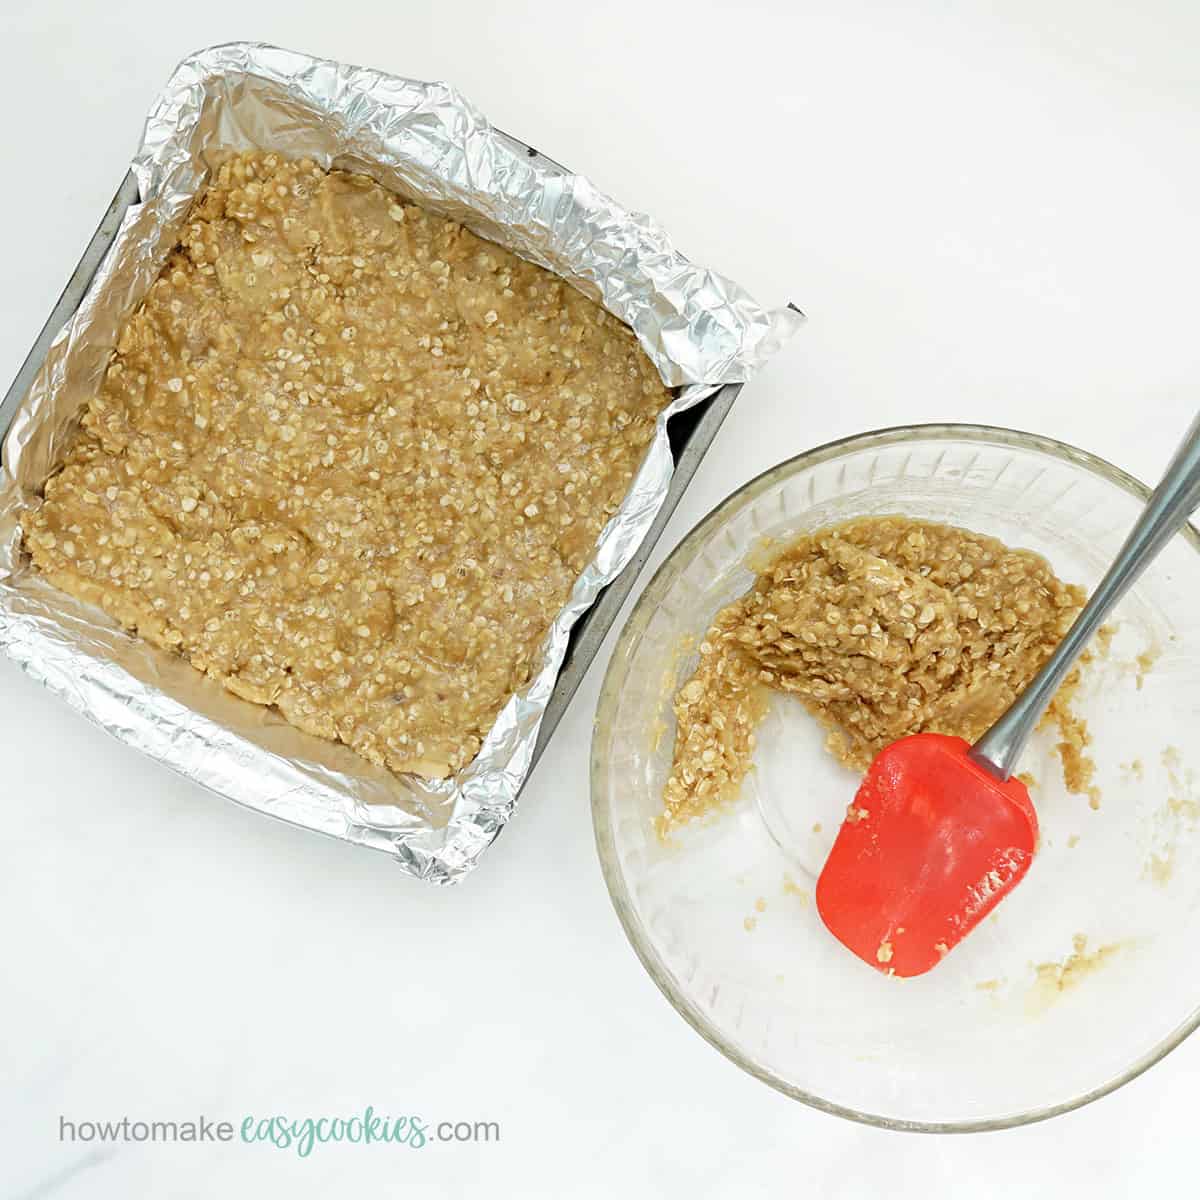 patting butter, brown sugar and oatmeal crust into square baking pan